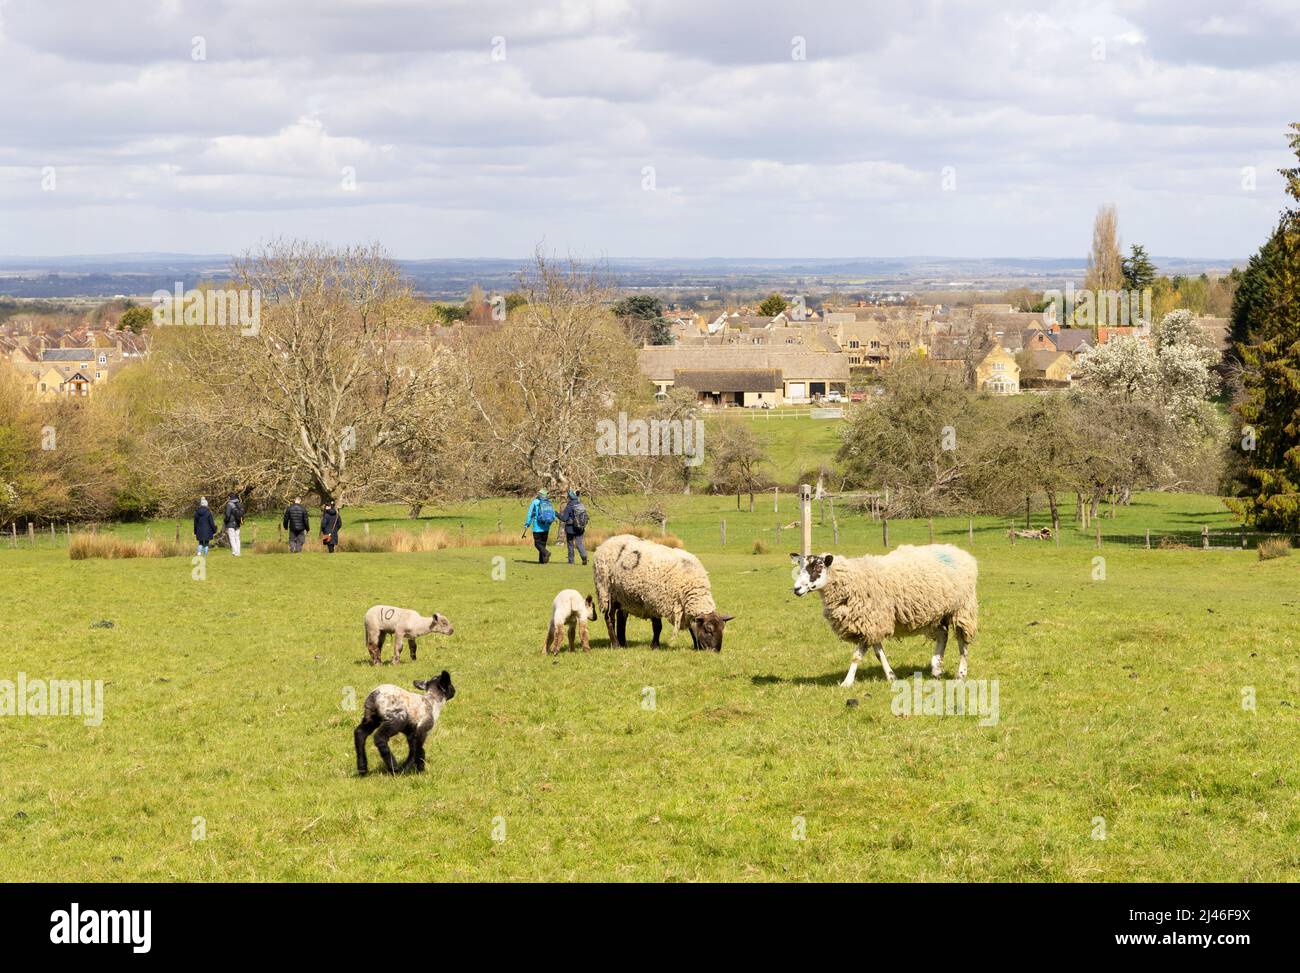 Cotswold Way National Trail - people walking the footpath through a field of sheep and lambs in spring, Broadway Village, Cotswolds, Worcestershire UK Stock Photo